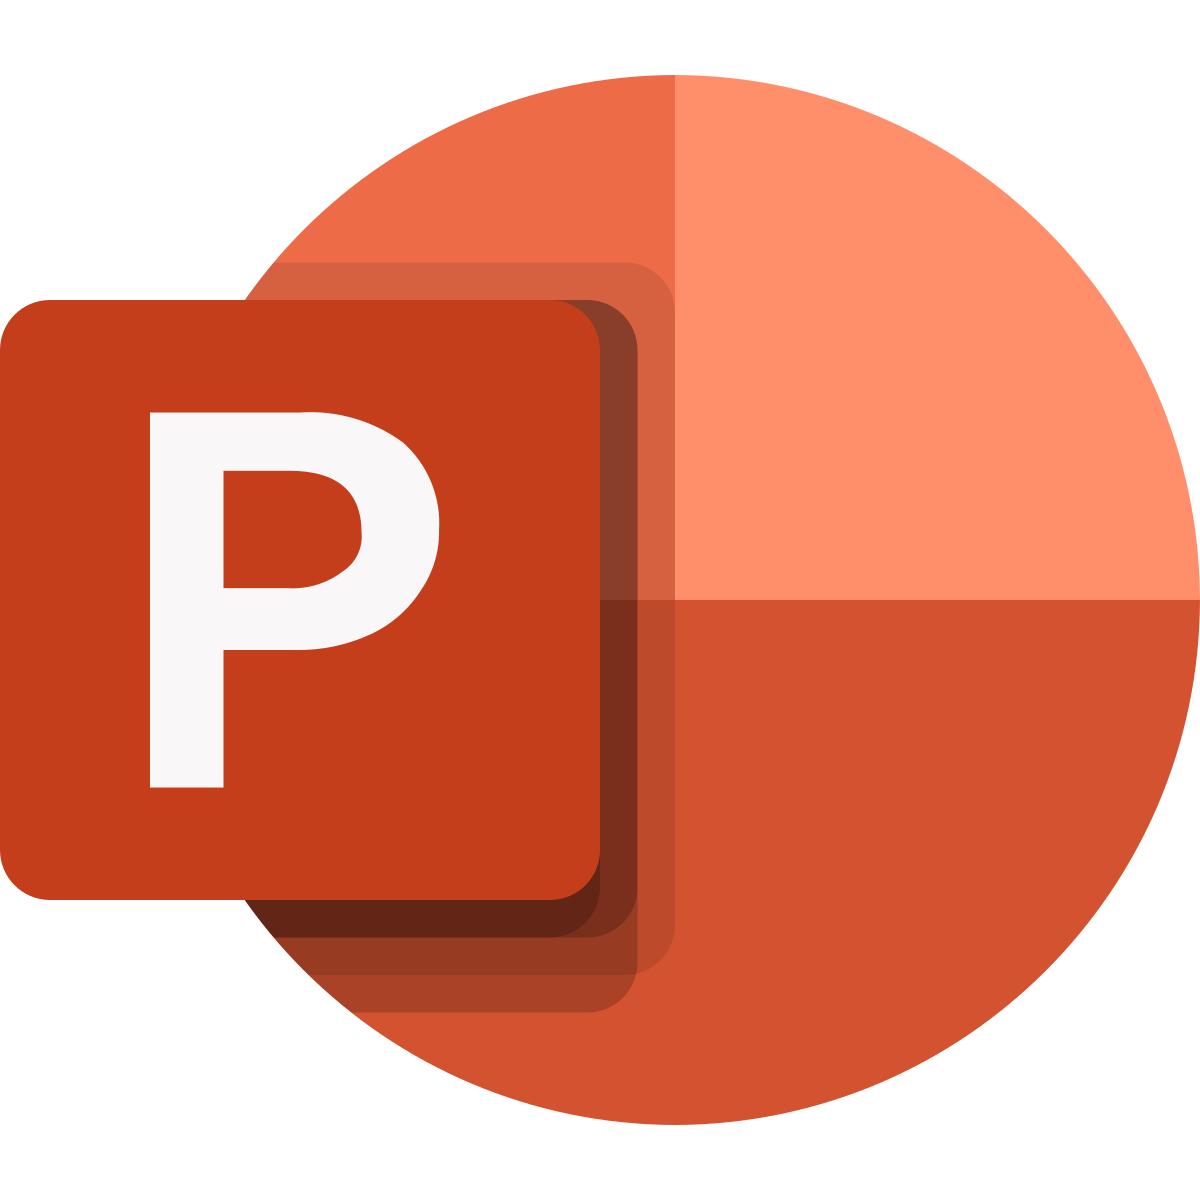 powerpoint for mac free download 2016